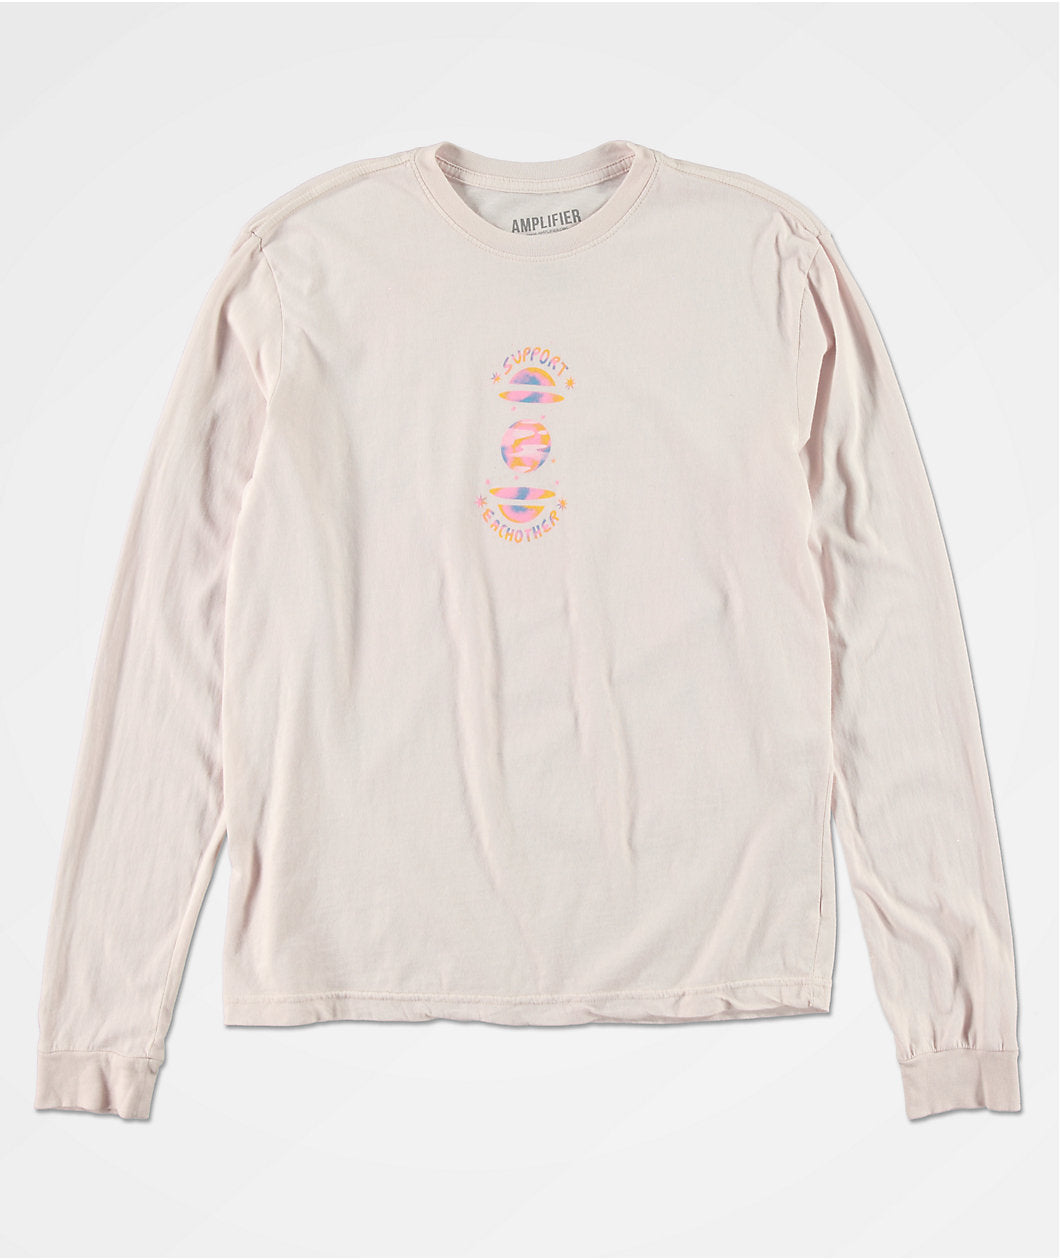 SUPPORT EACH OTHER PINK LONG SLEEVE T-SHIRT